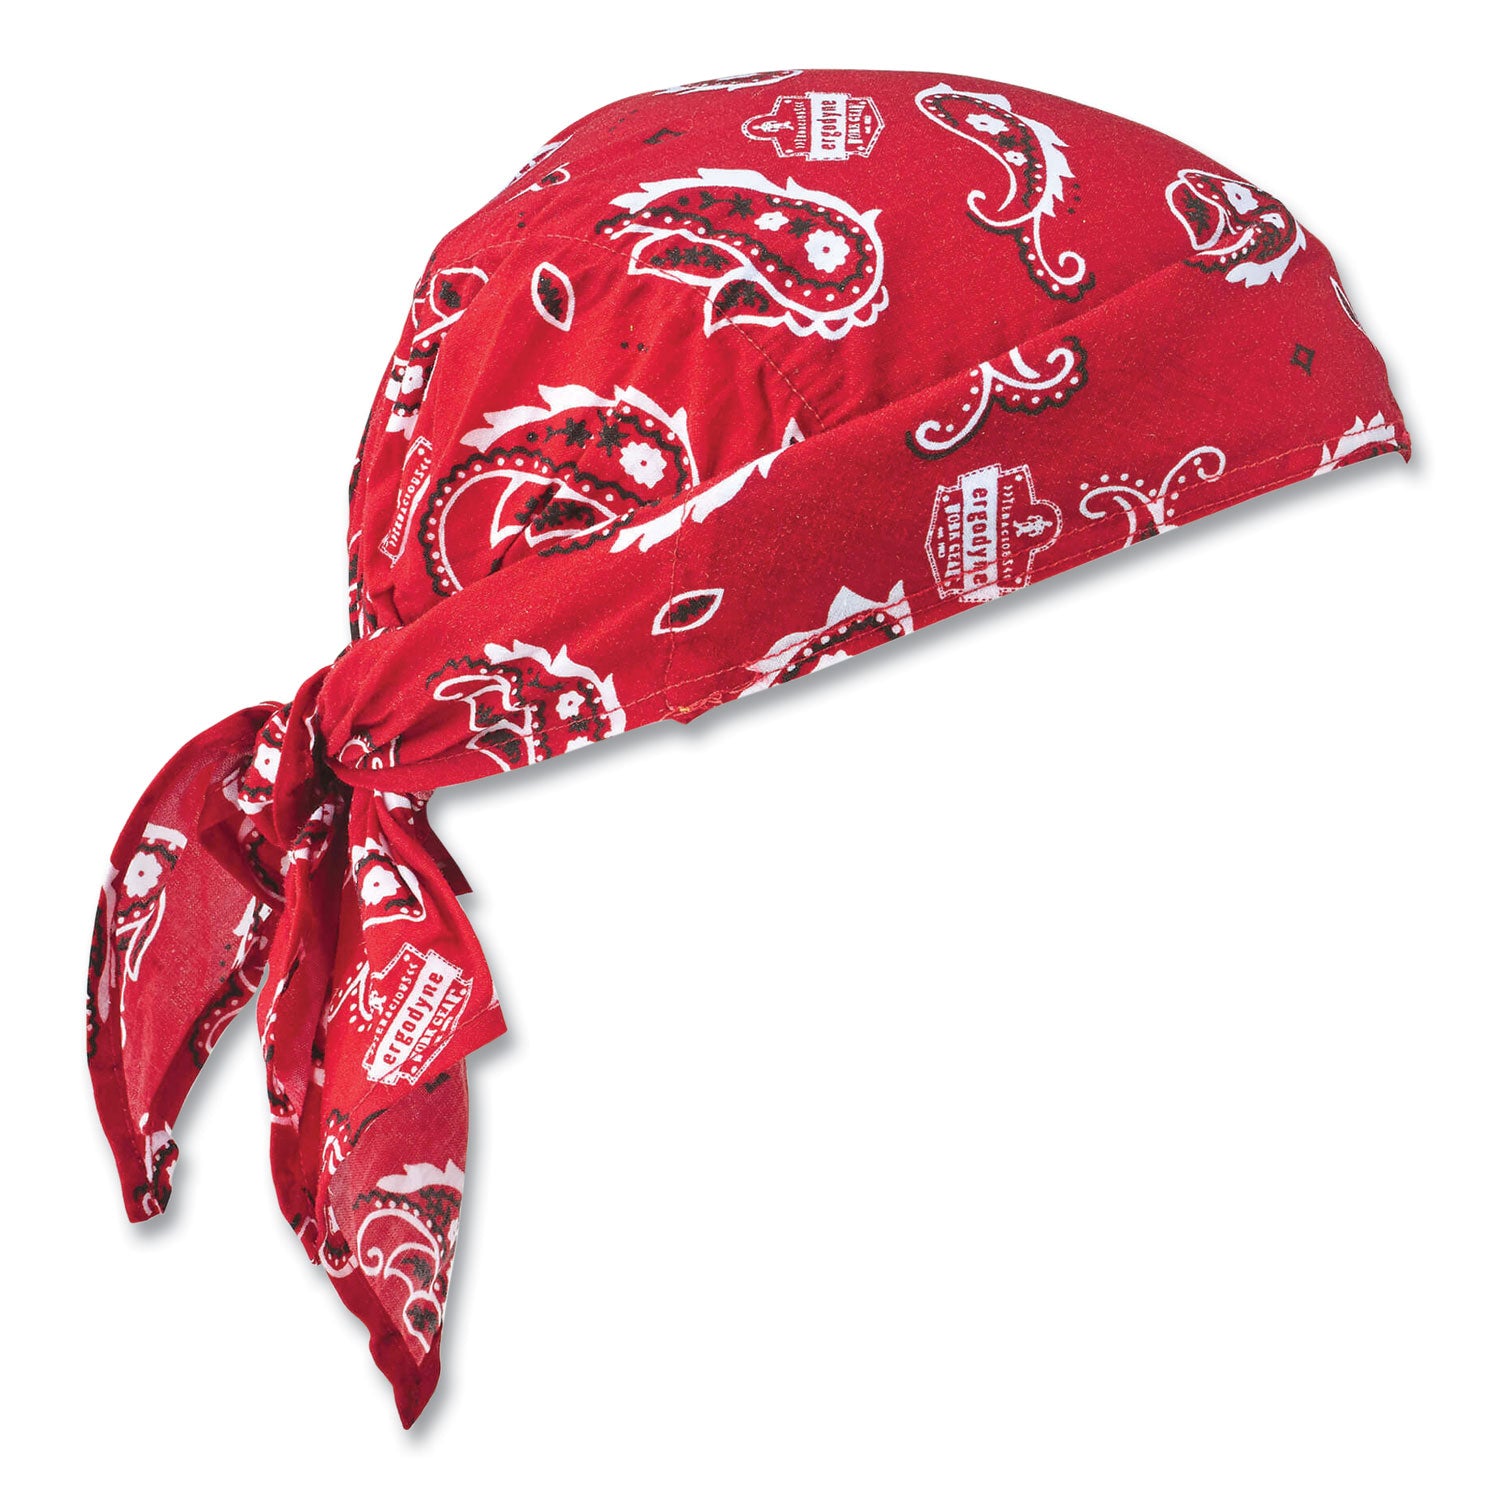 chill-its-6710-cooling-embedded-polymers-tie-bandana-triangle-hat-one-size-fit-most-red-western-ships-in-1-3-business-days_ego12325 - 1